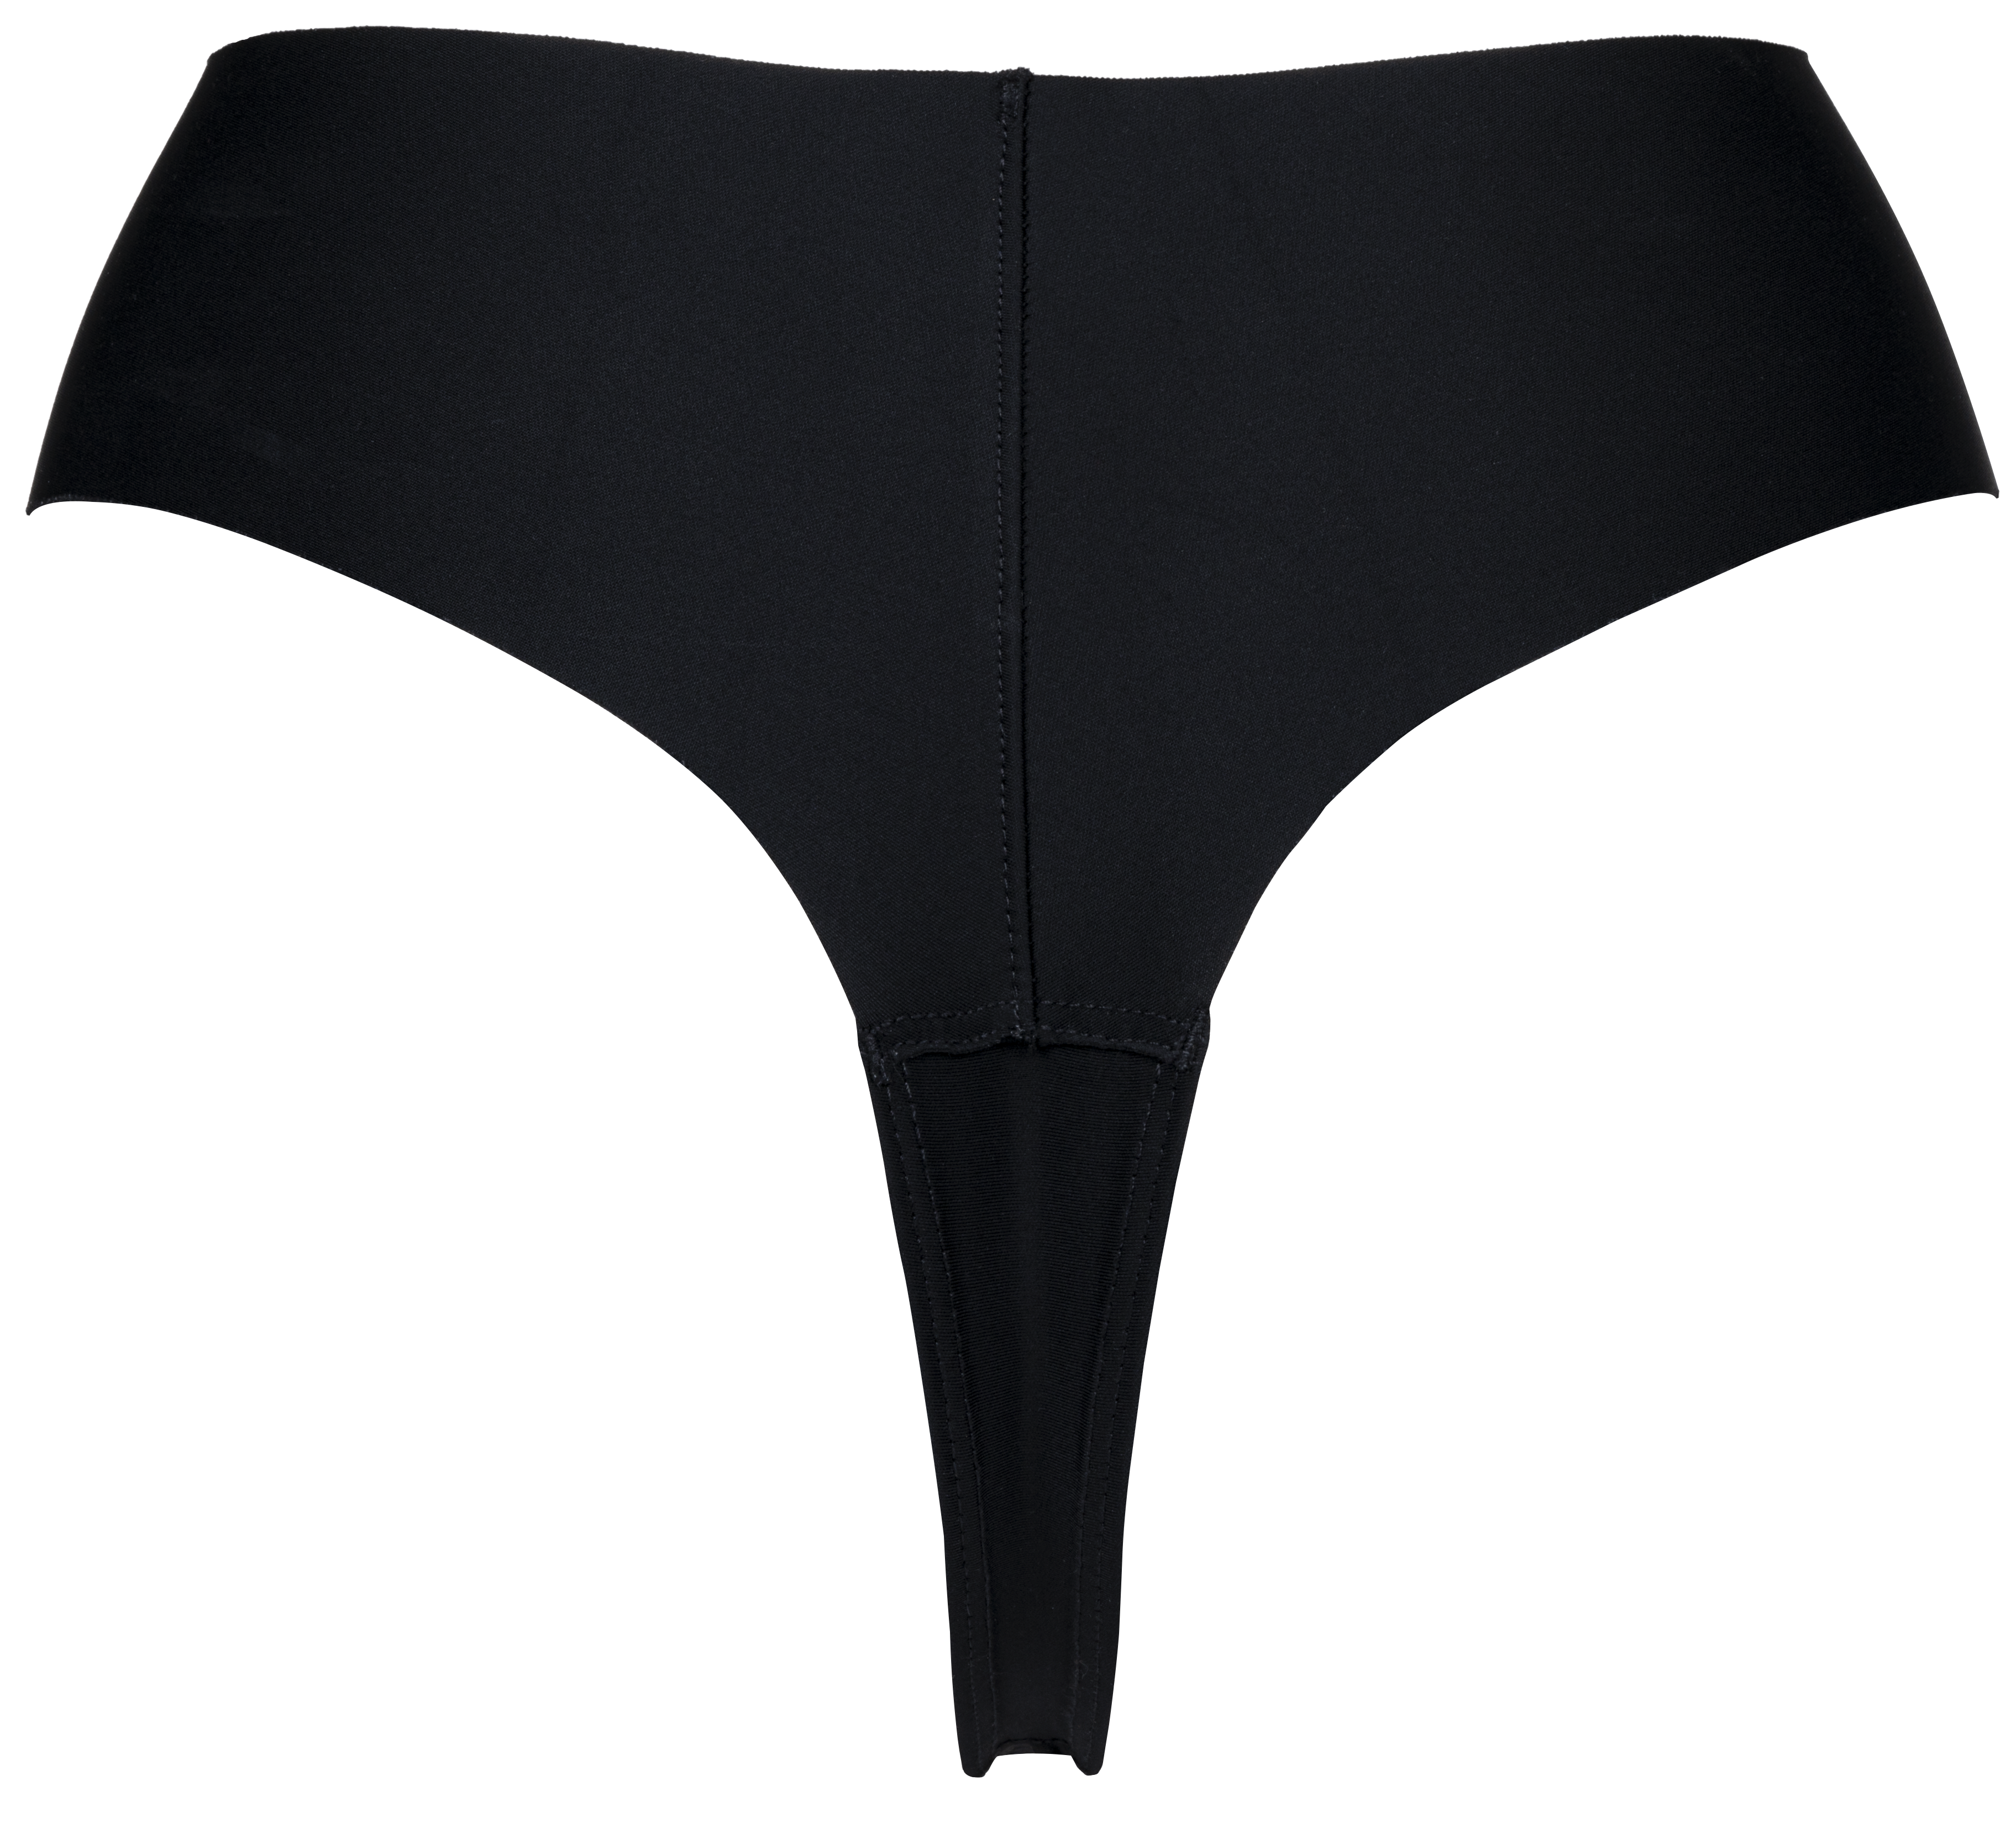 JIV ATHLETICS The Cameltoe Proof Mid Rise Thong In Black. - Size L